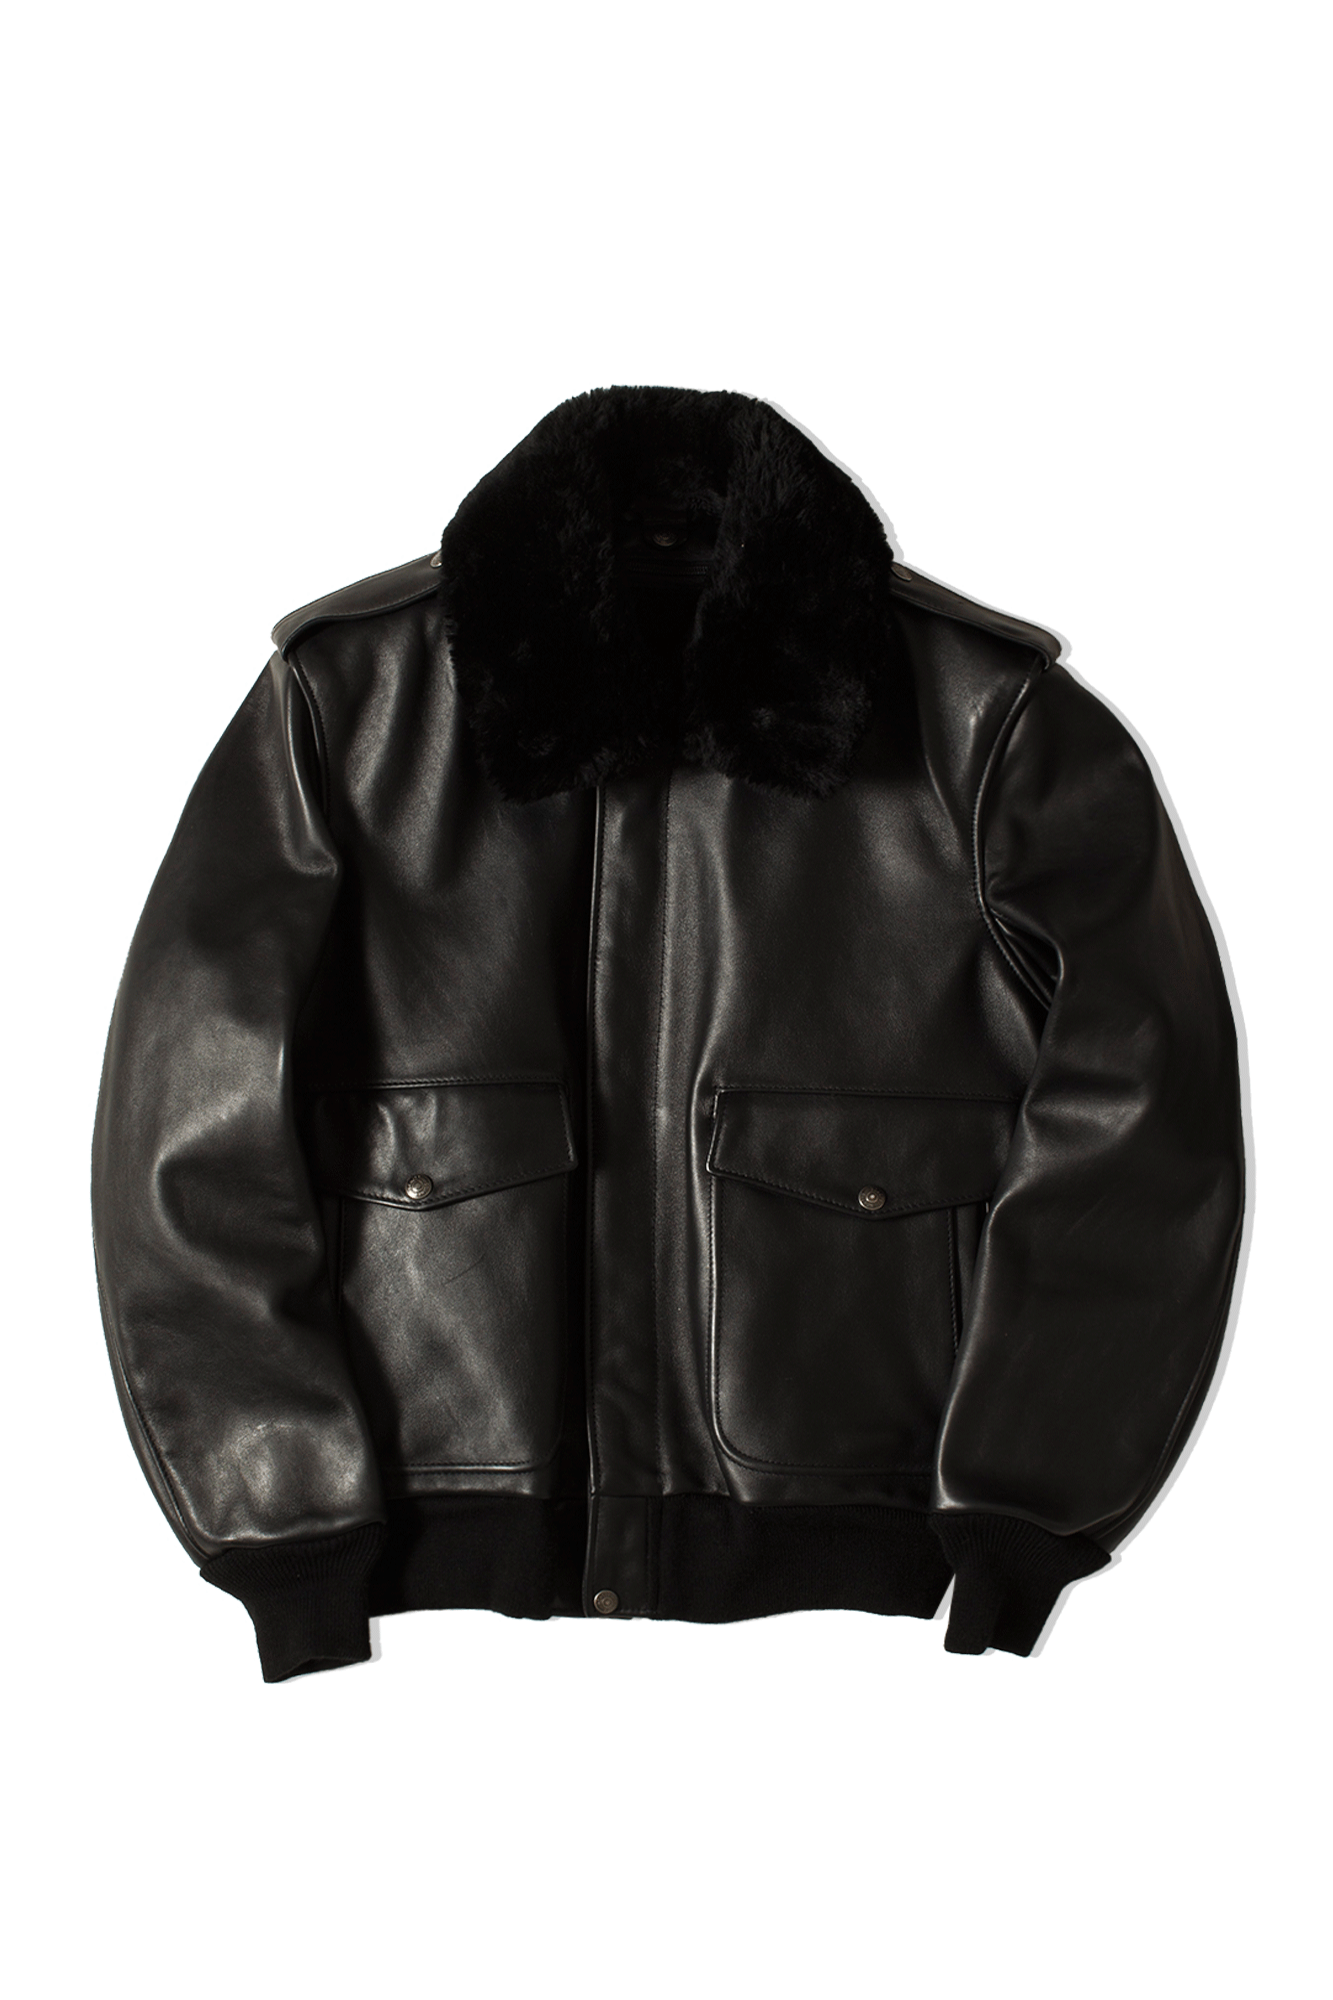 Schott Leather jackets A-2 Naked Cowhide Leather Flight Jacket Black 184SMBLACK#000#BLACK#36 - One Block Down